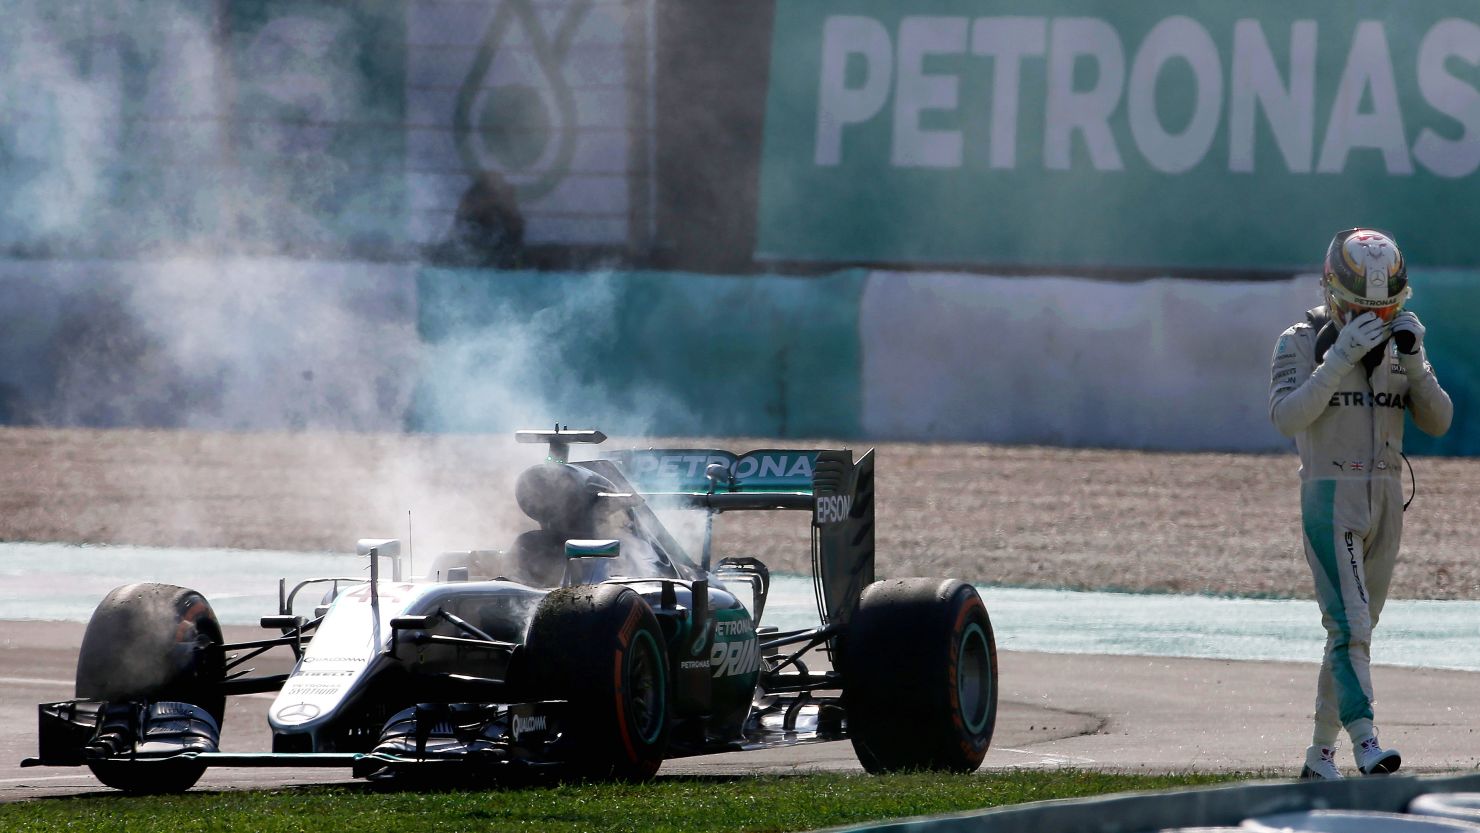 Hamilton's engine failure in Sepang prevented him from regaining the championship lead.